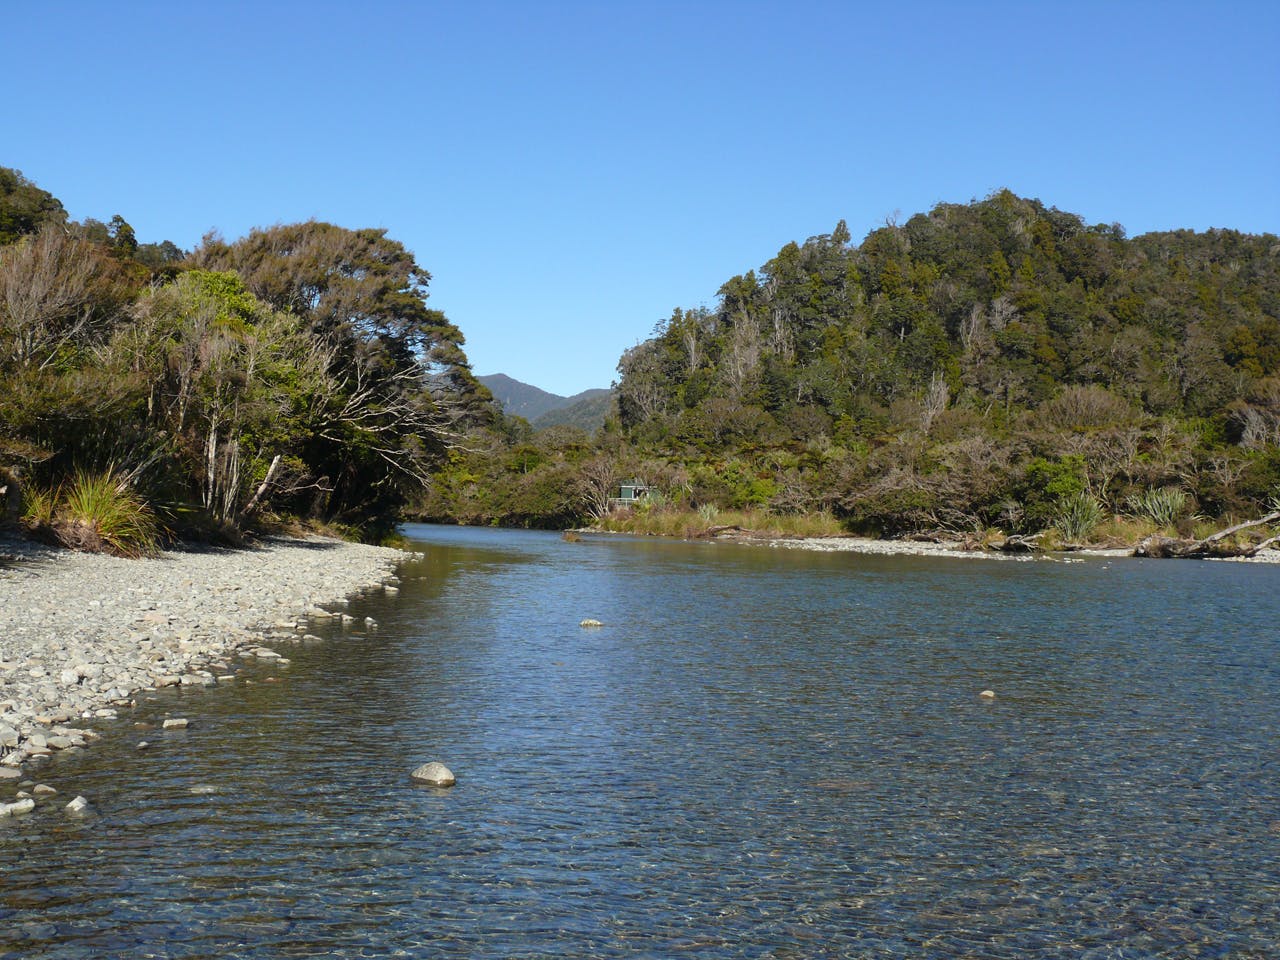 The mouth of the Stafford River with Stafford Hut nestled on its banks. Photo: Geoff Spearpoint